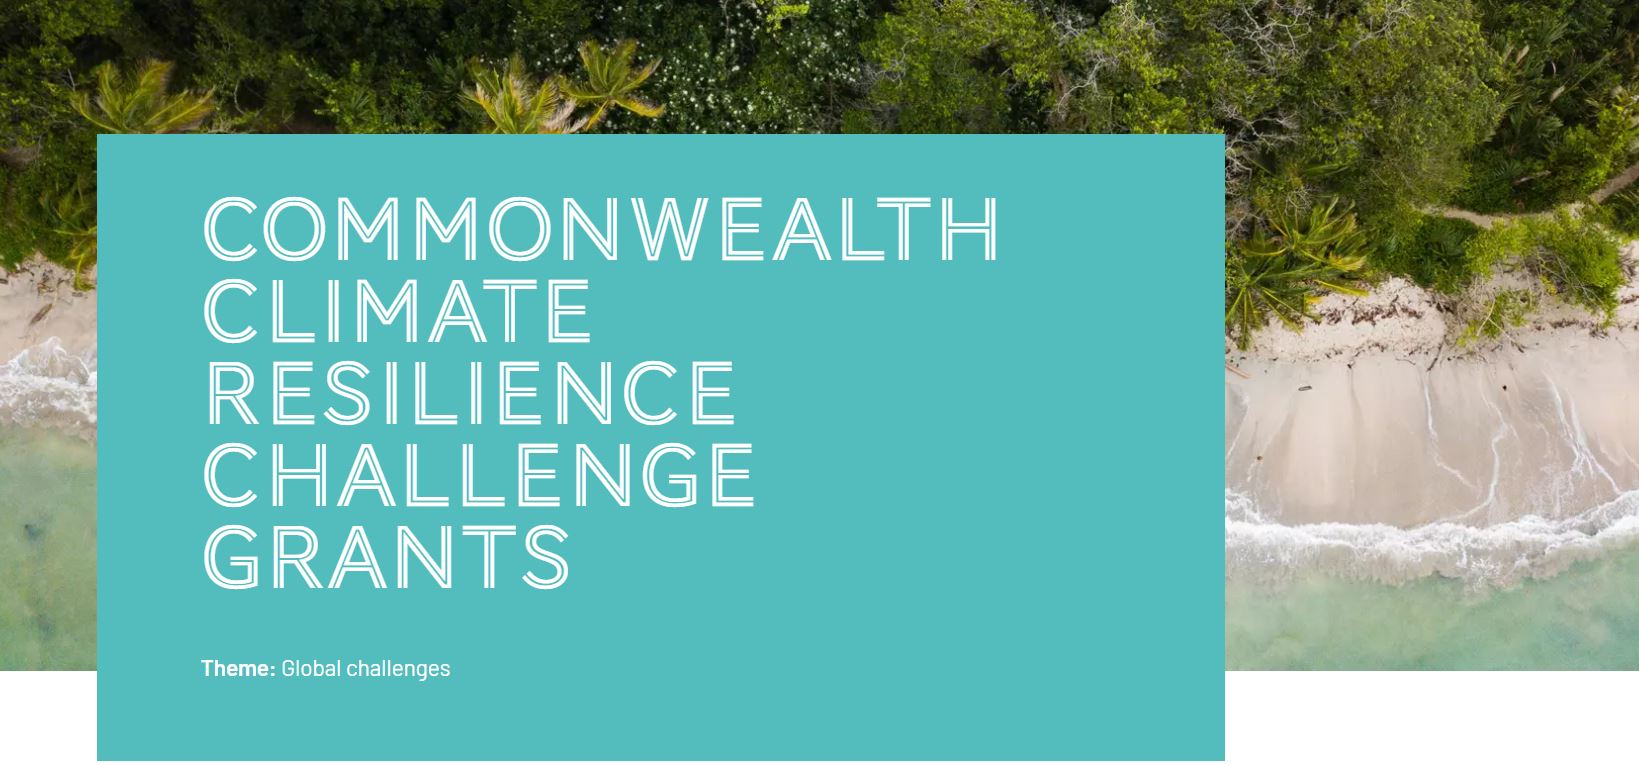 Commonwealth Climate Resilience Challenge Grants 2022 for Developing Countries